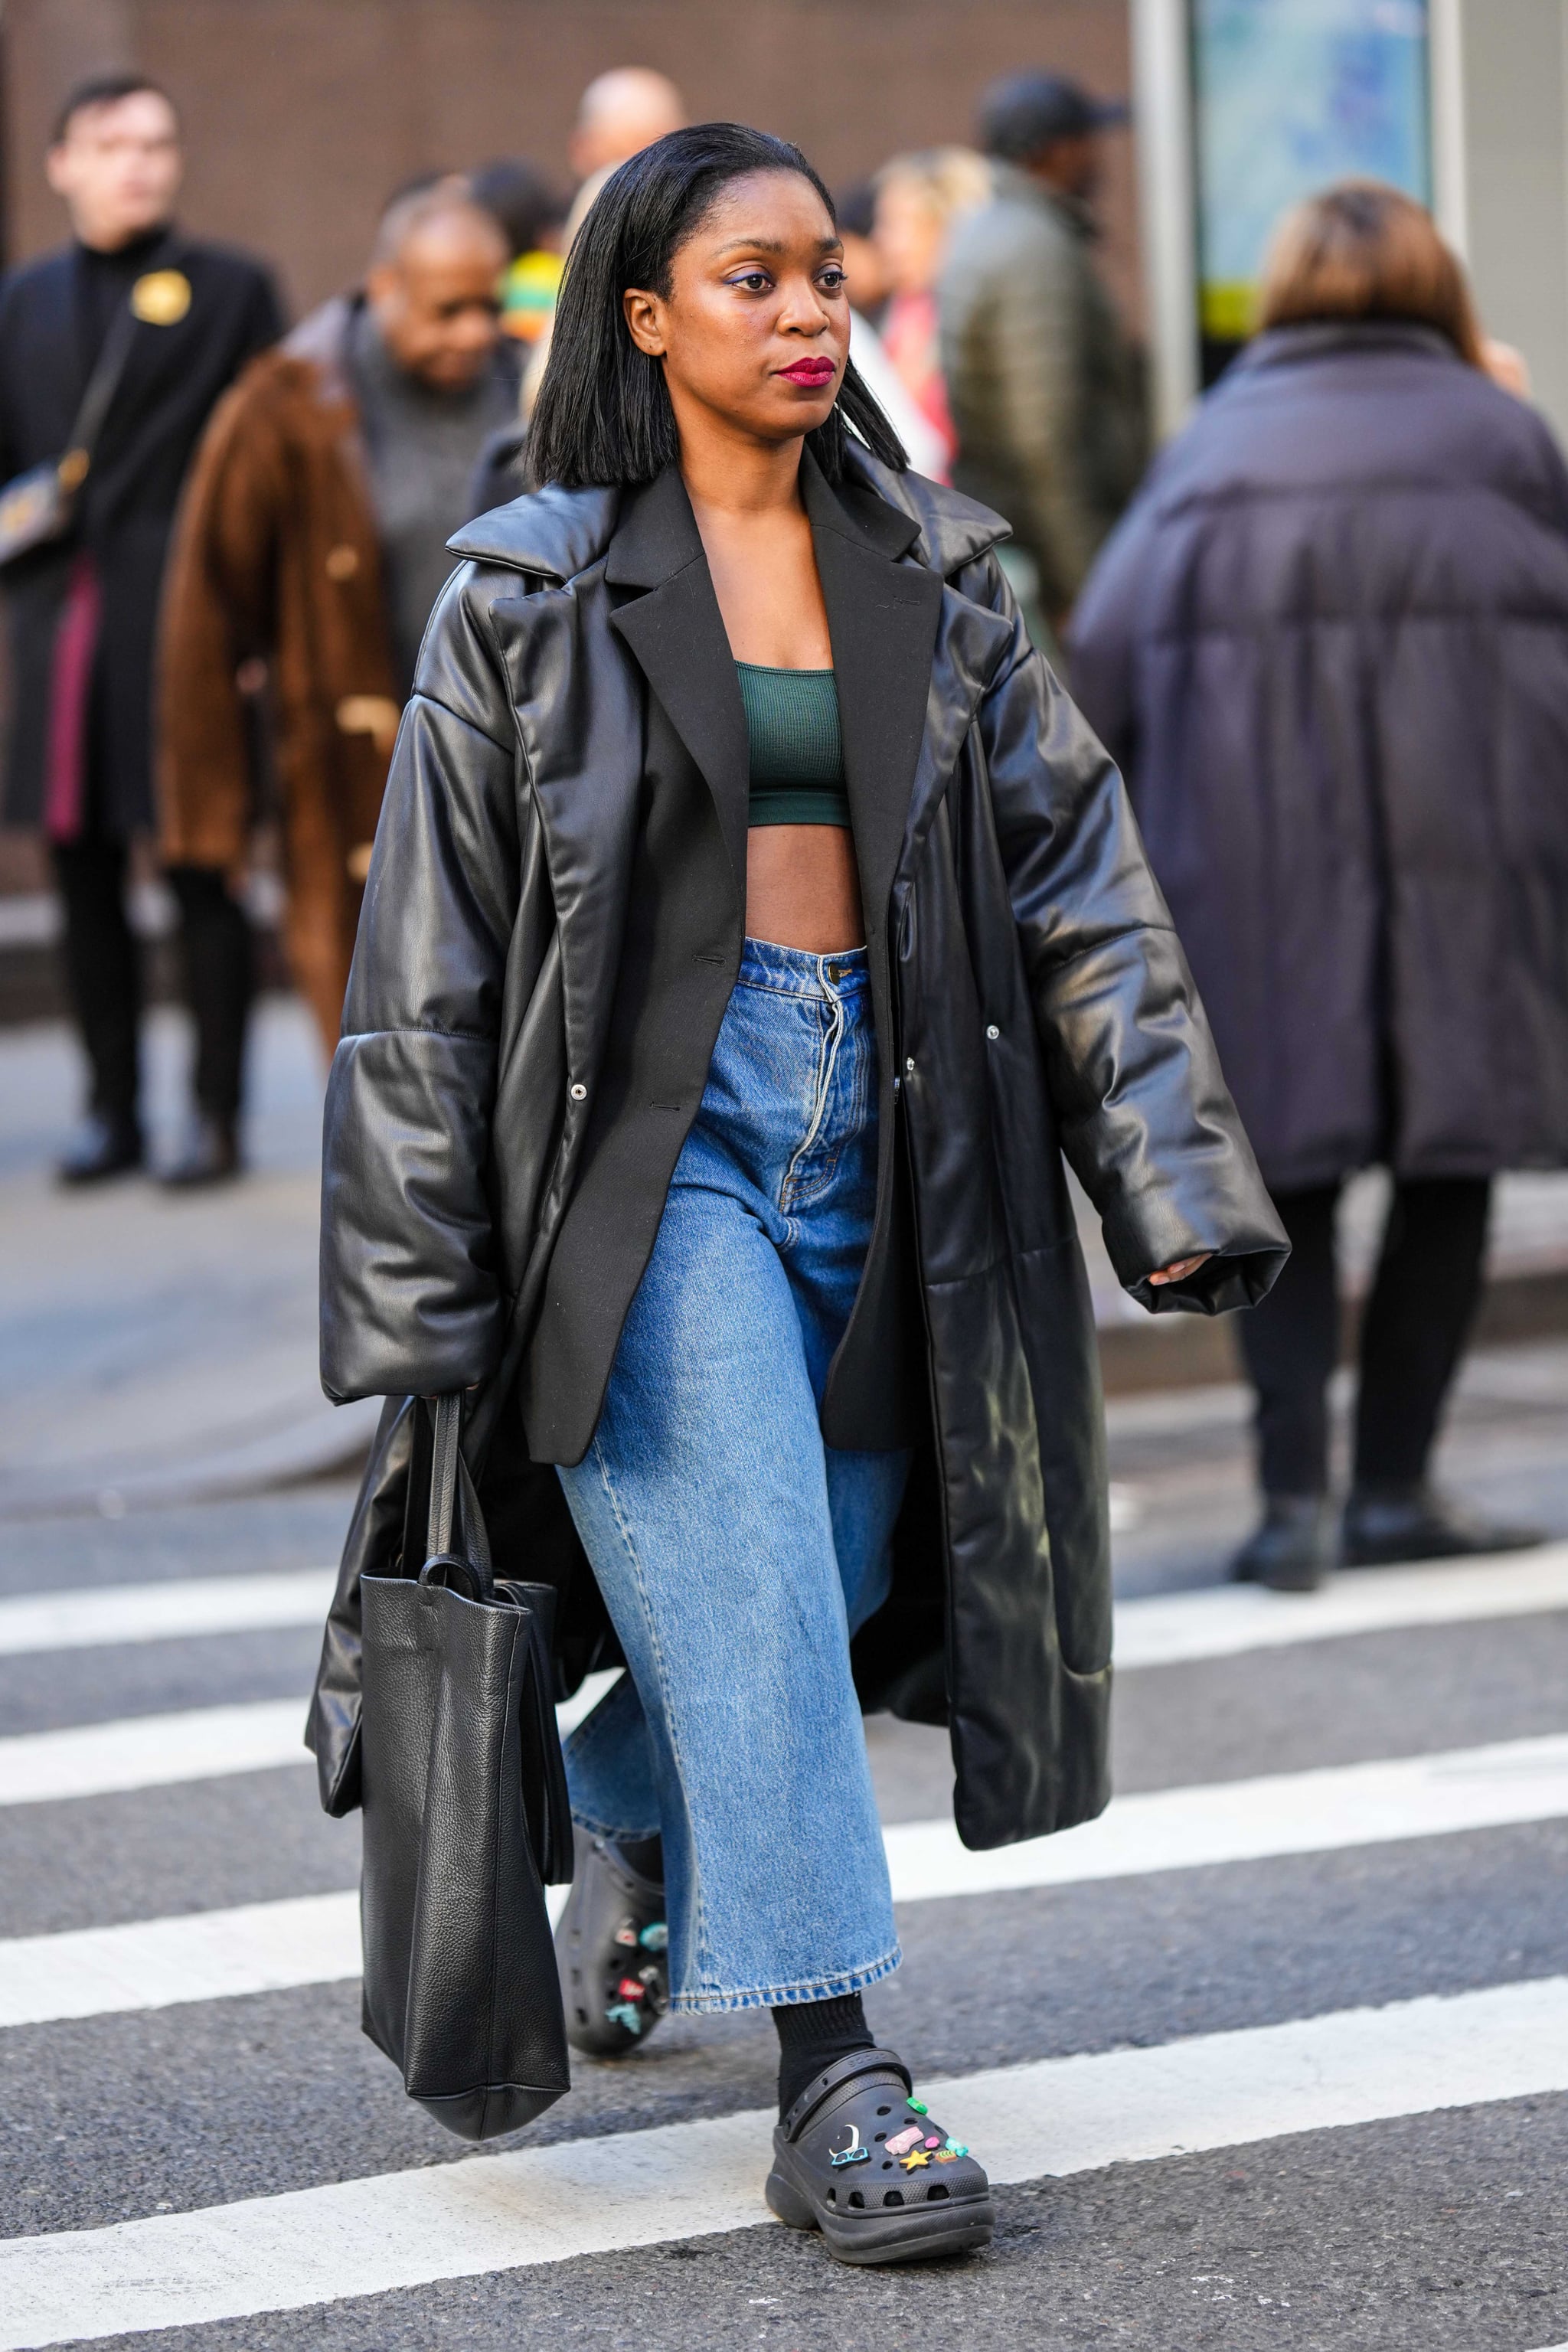 How to wear a bralette and Look Like Pro With Diff